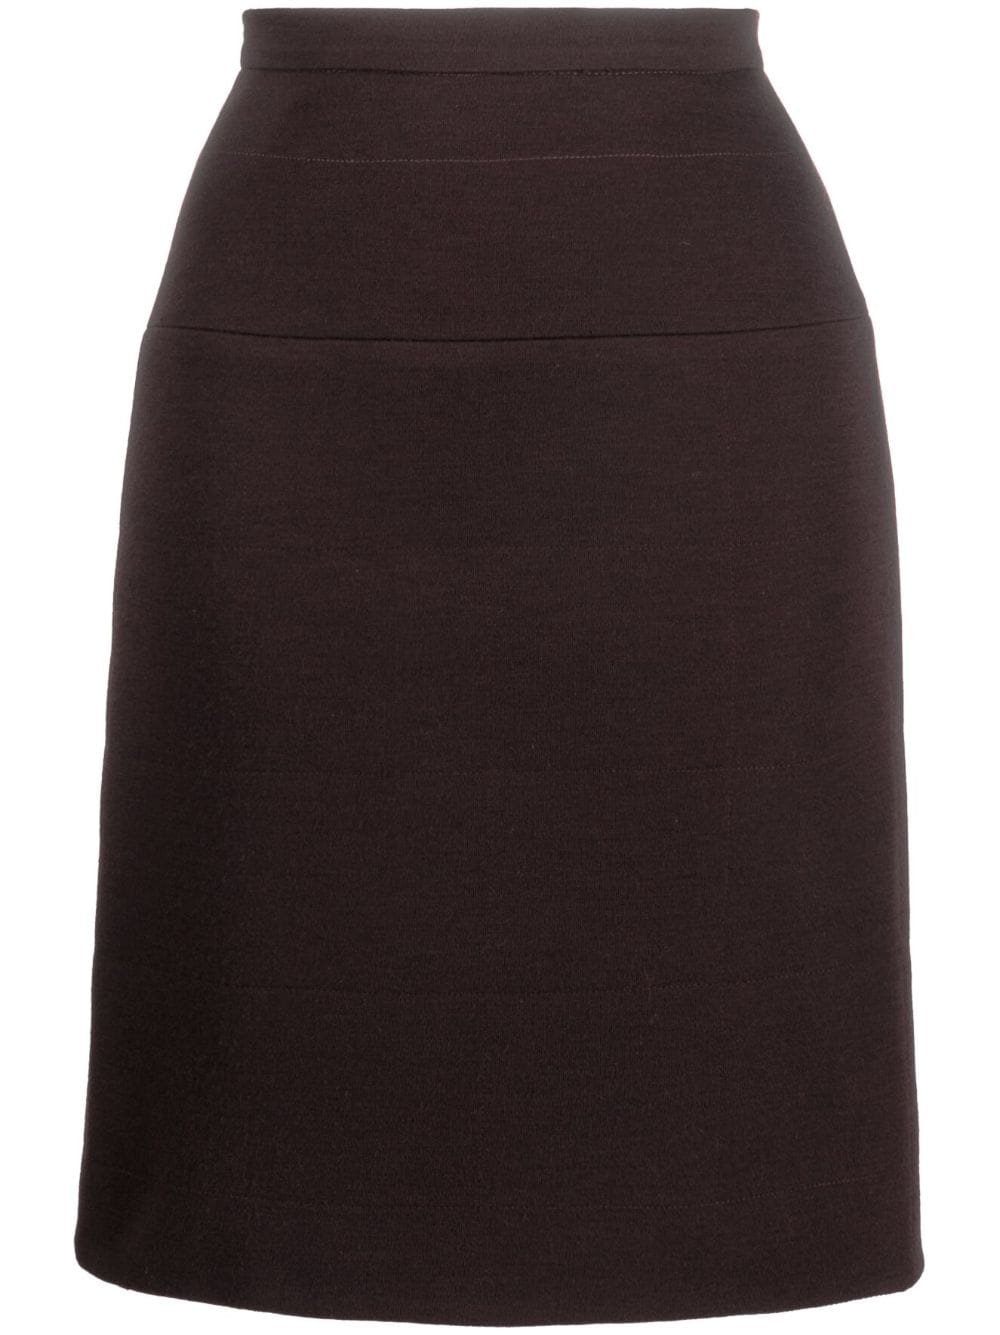 CHANEL Pre-Owned 1990s high-waist wool skirt - Brown